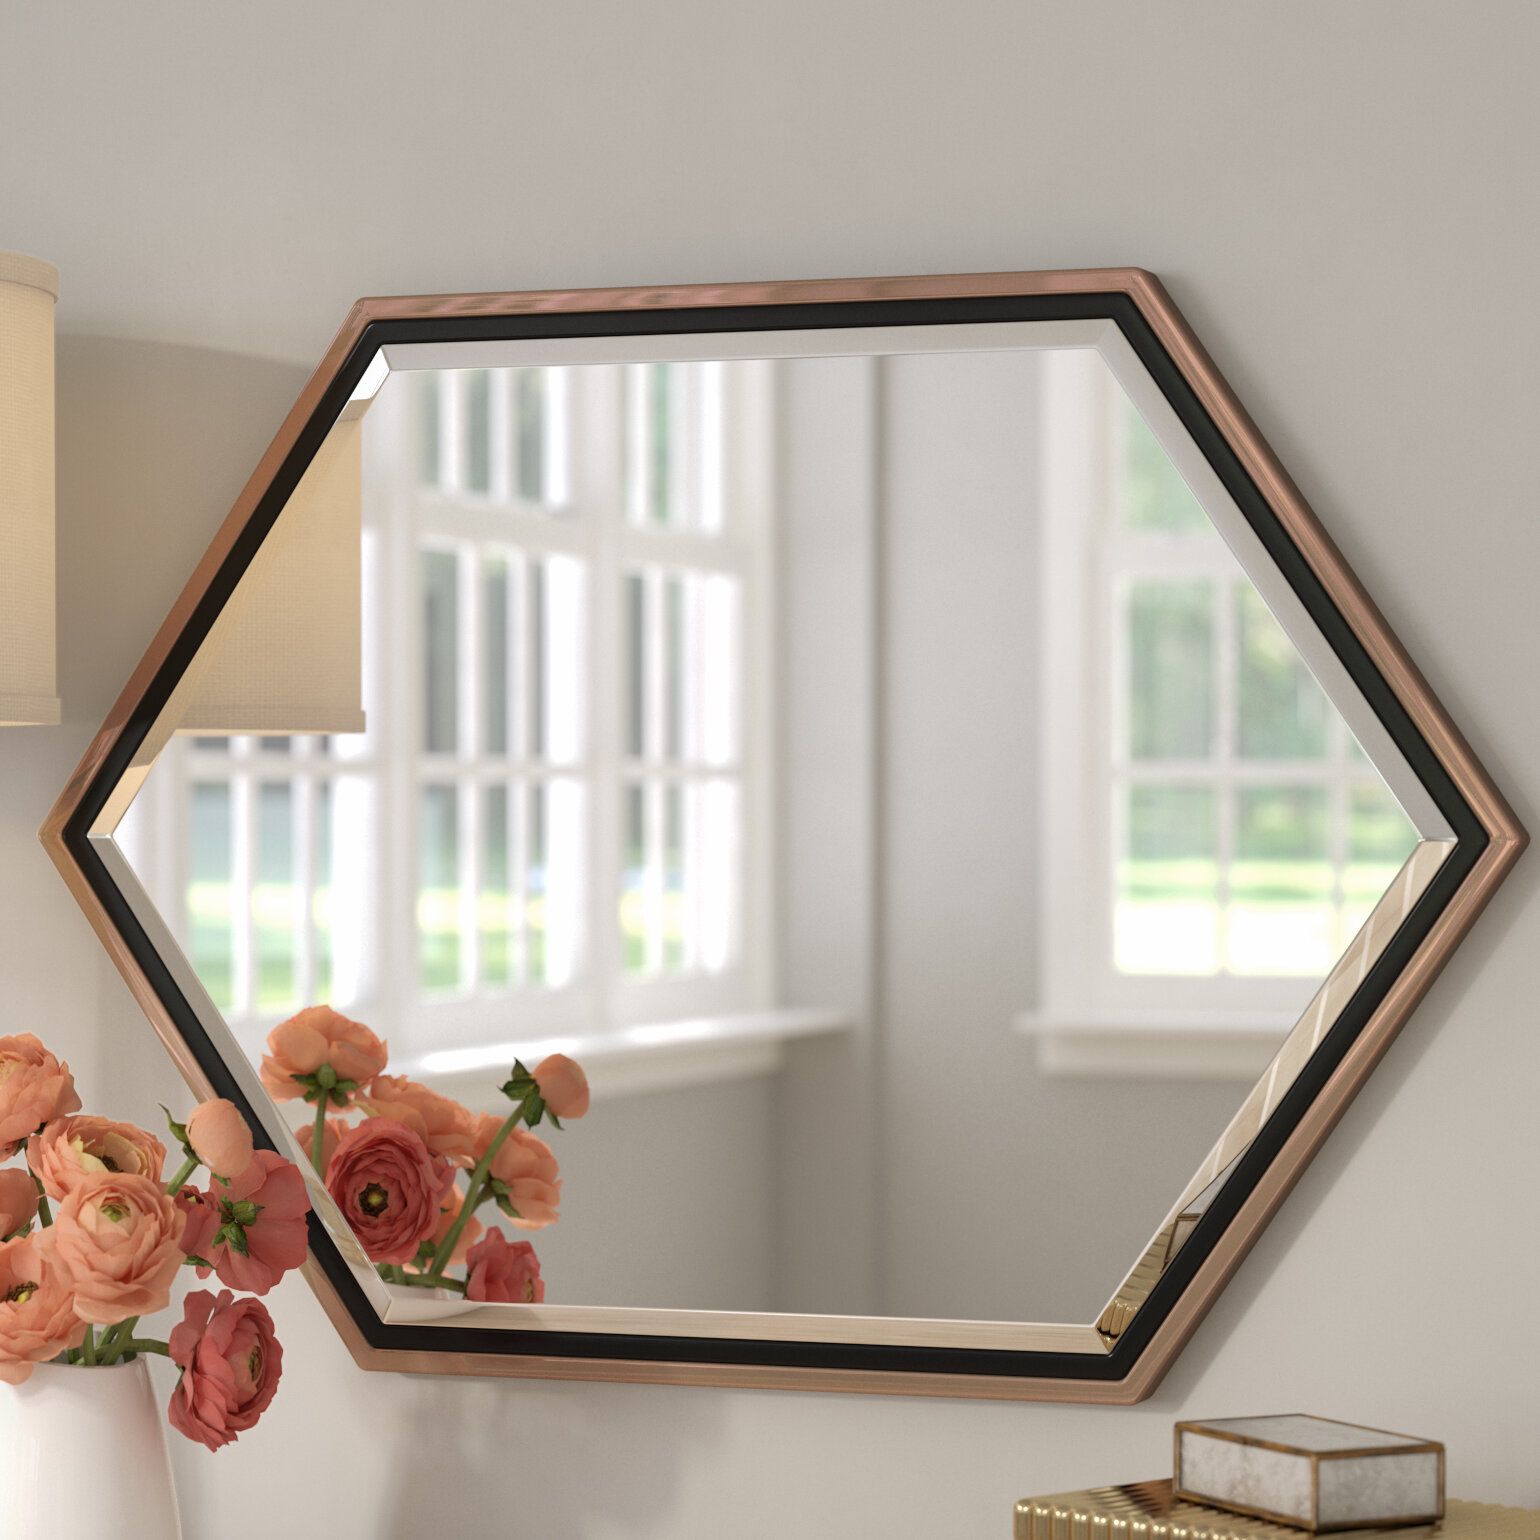 Shabby Chic Wall Mirror | Wayfair Within Saylor Wall Mirrors (View 7 of 20)